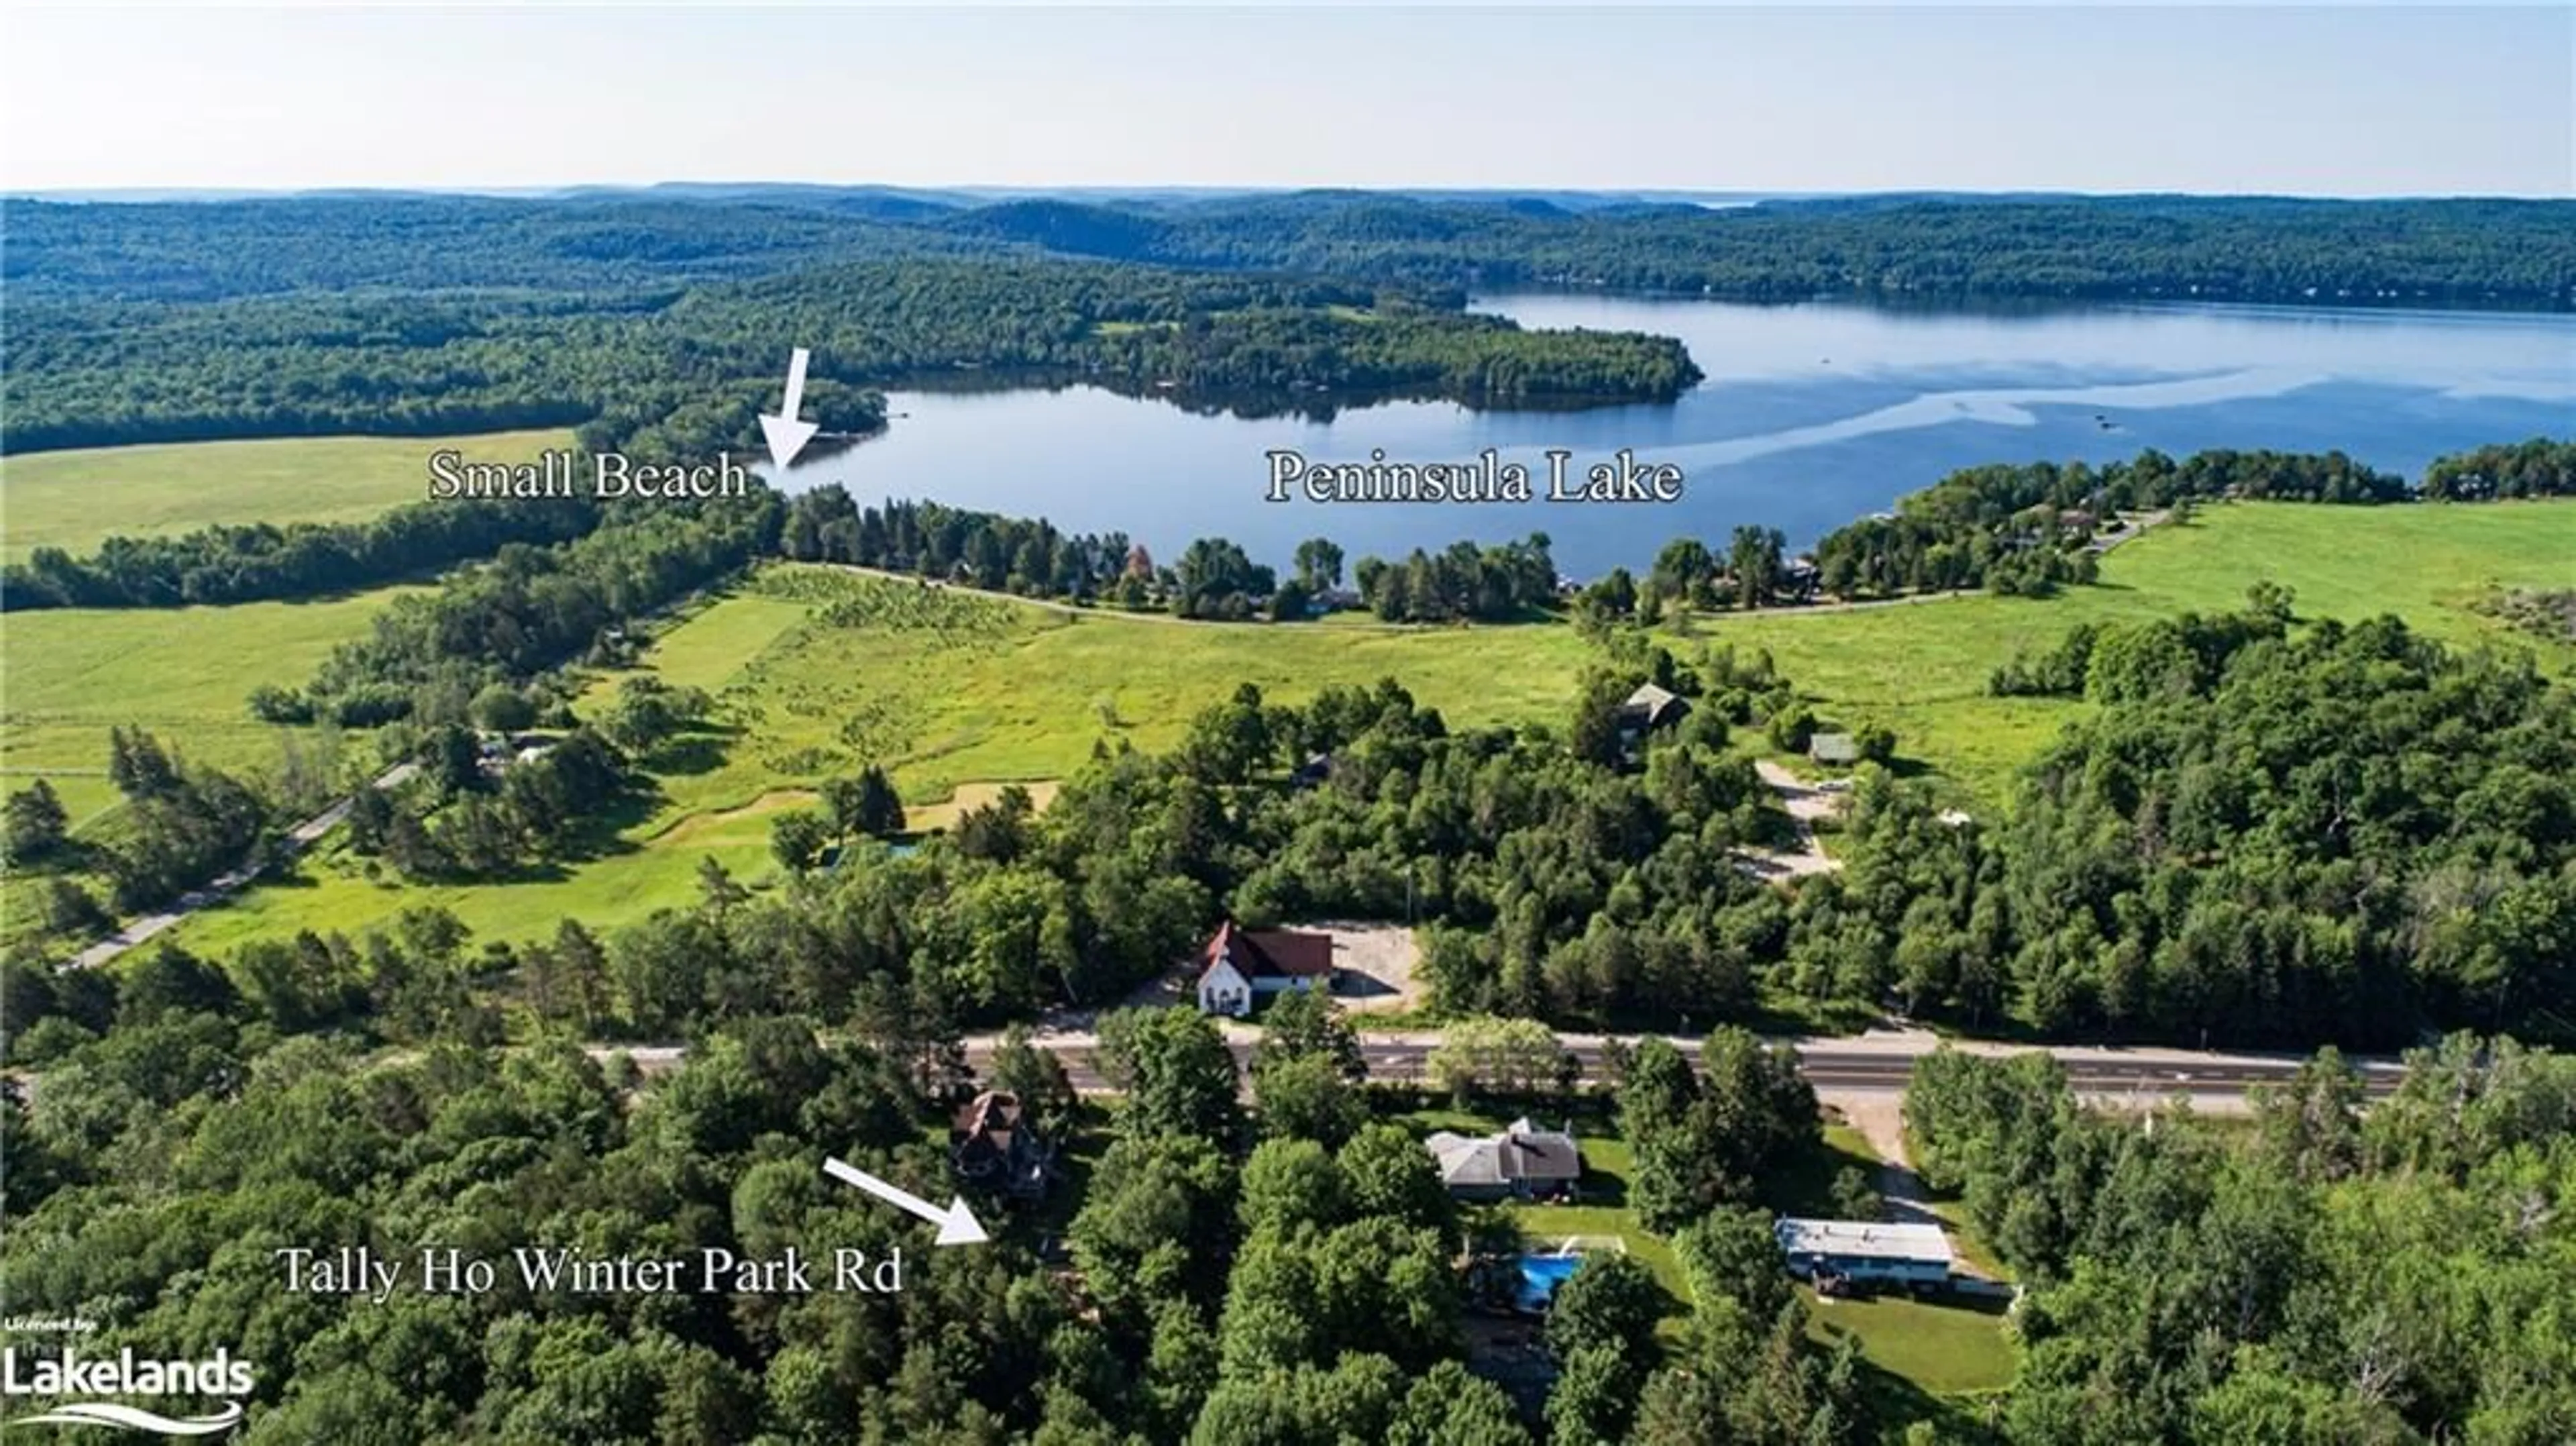 Lakeview for 0 Tally Ho Winter Park Rd, Lake of Bays (Twp) Ontario P1H 2J6